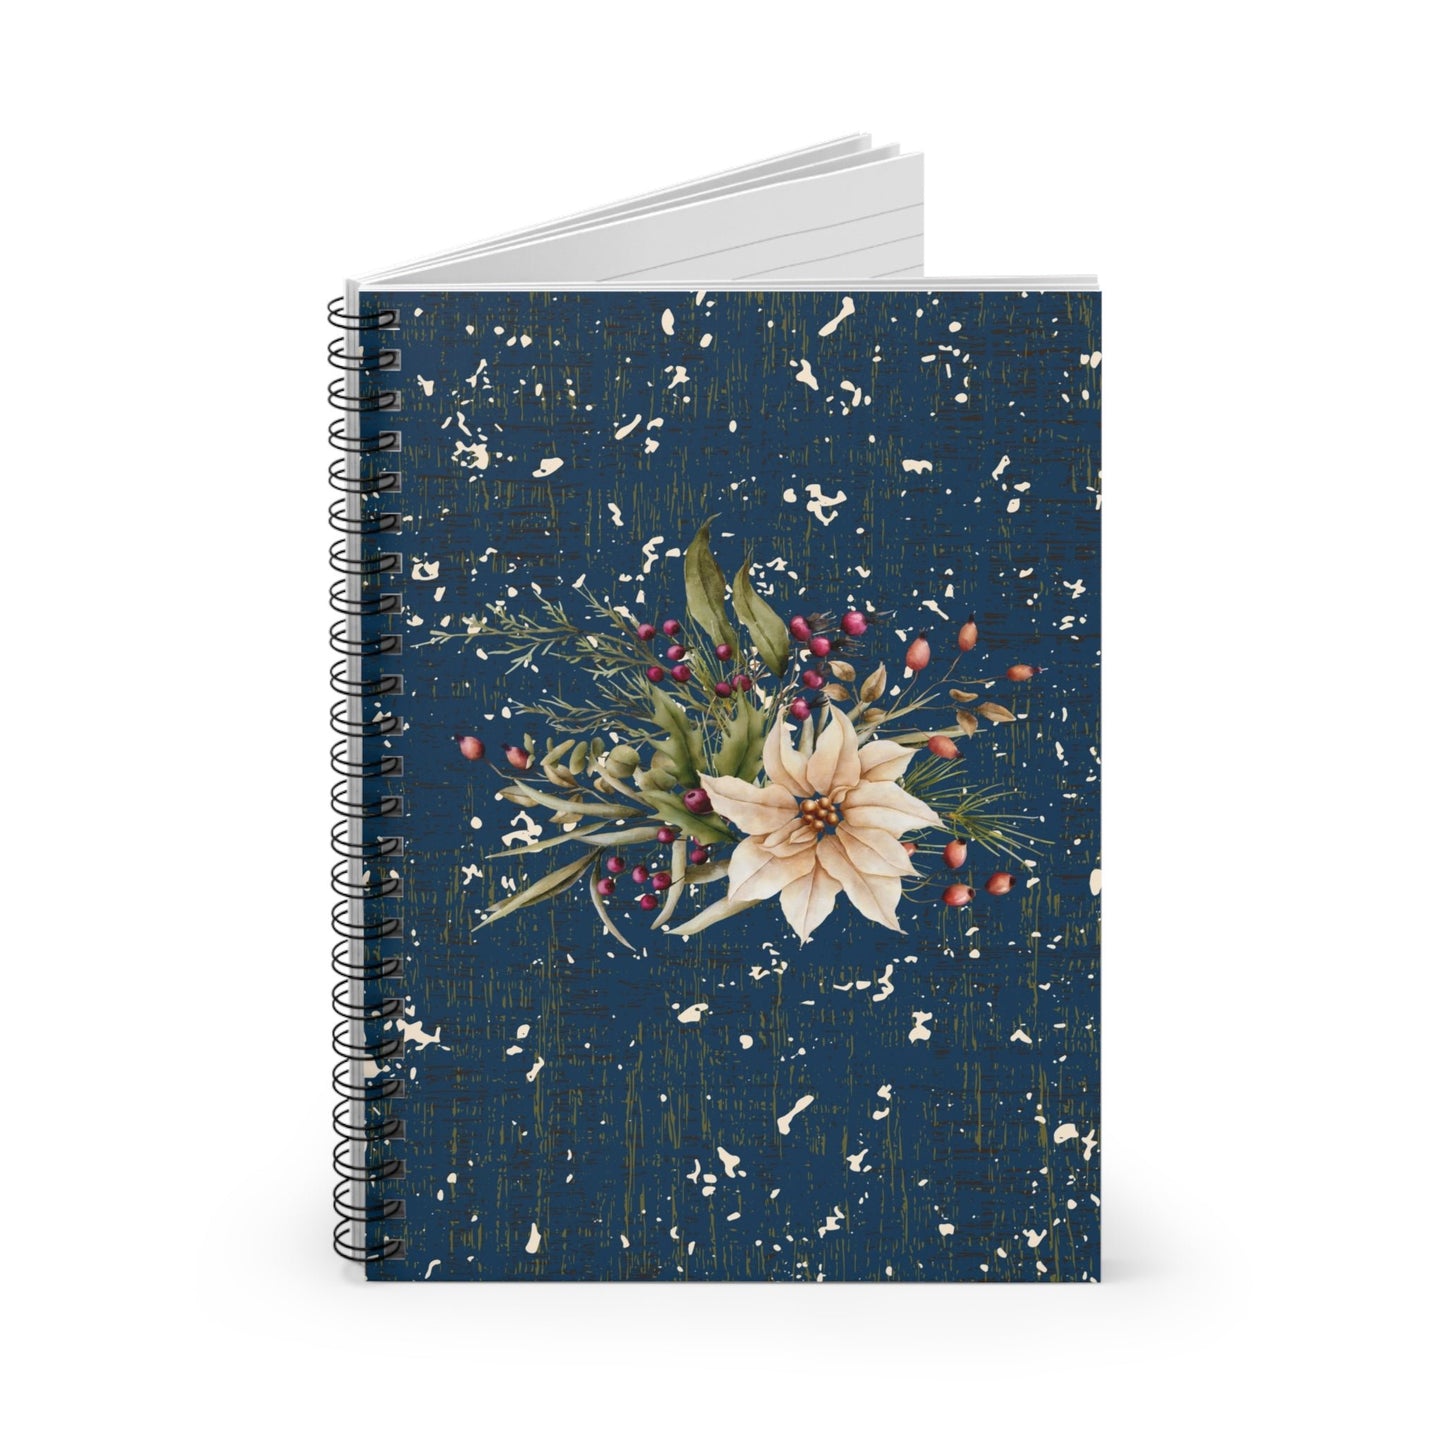 Holiday Floral Bouquet on Blue Speckled Spiral Notebook - Ruled Line: Festive Botanical Design - Eddy and Rita